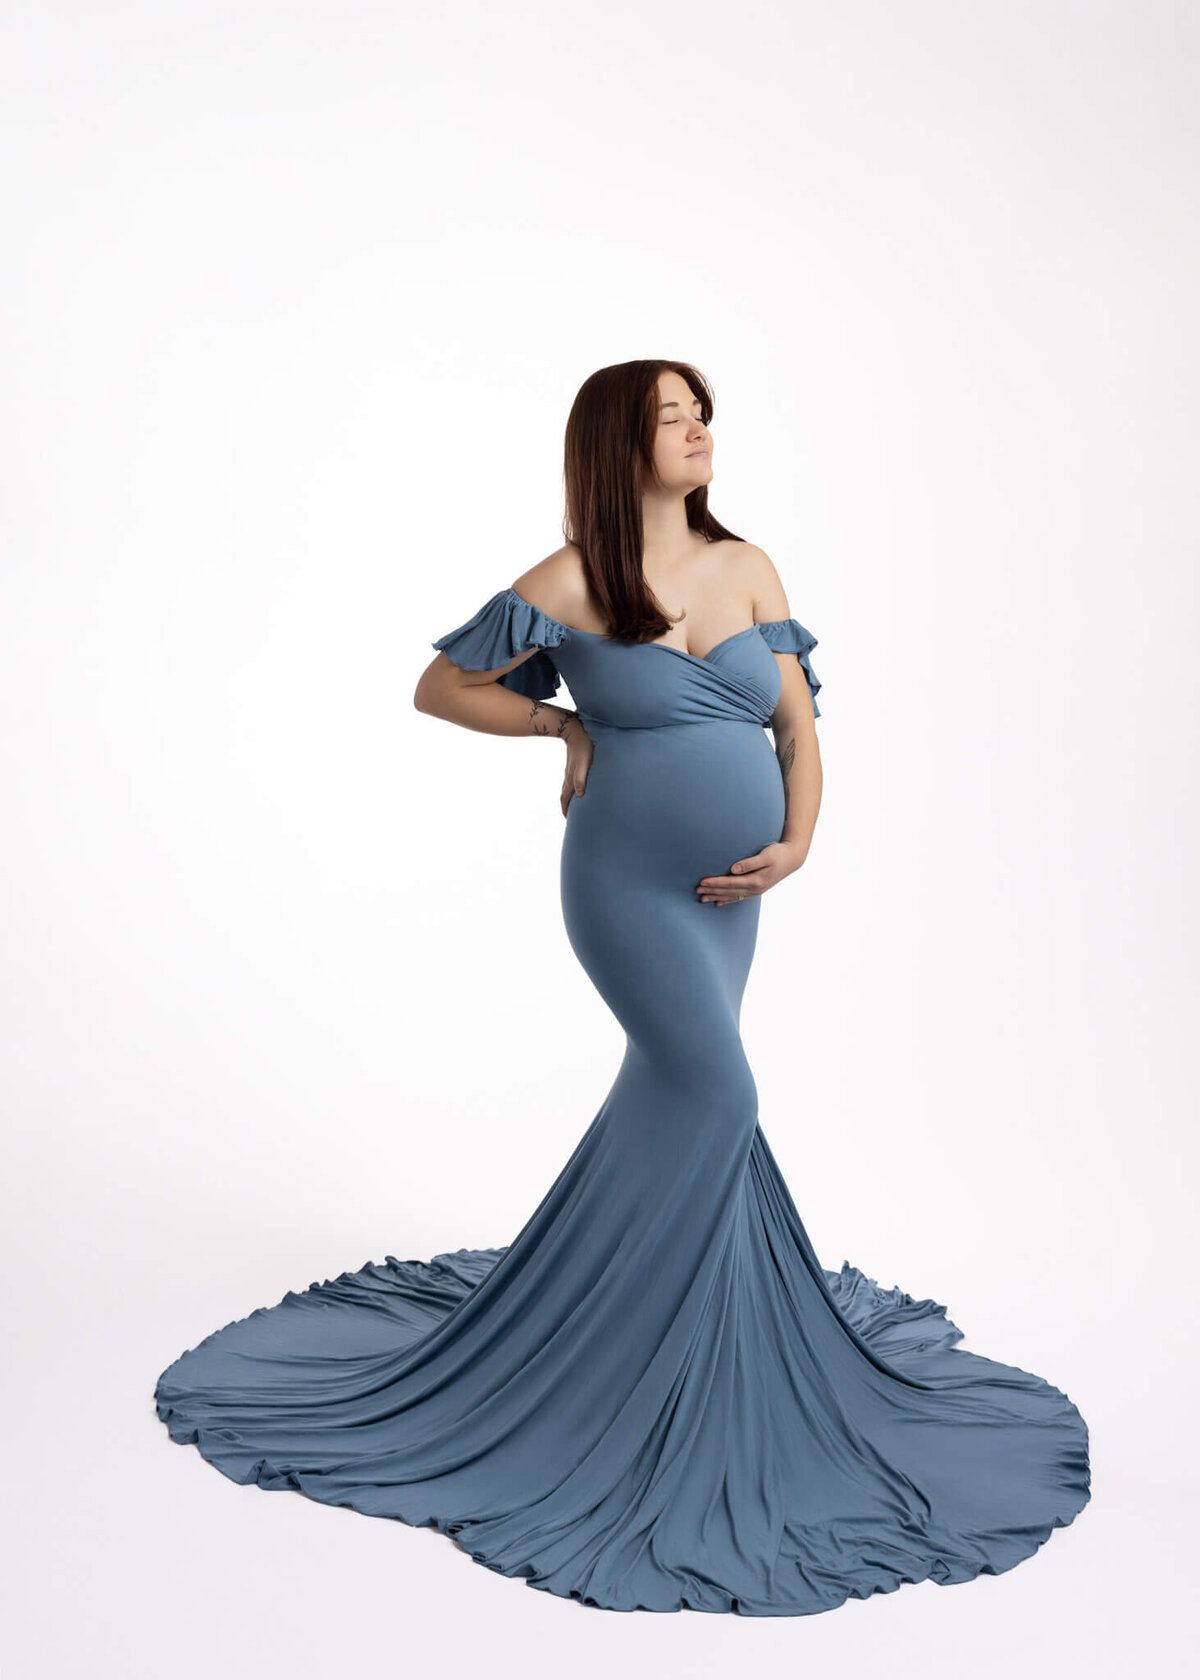 pregnant woman holding her belly wearing a blue dress